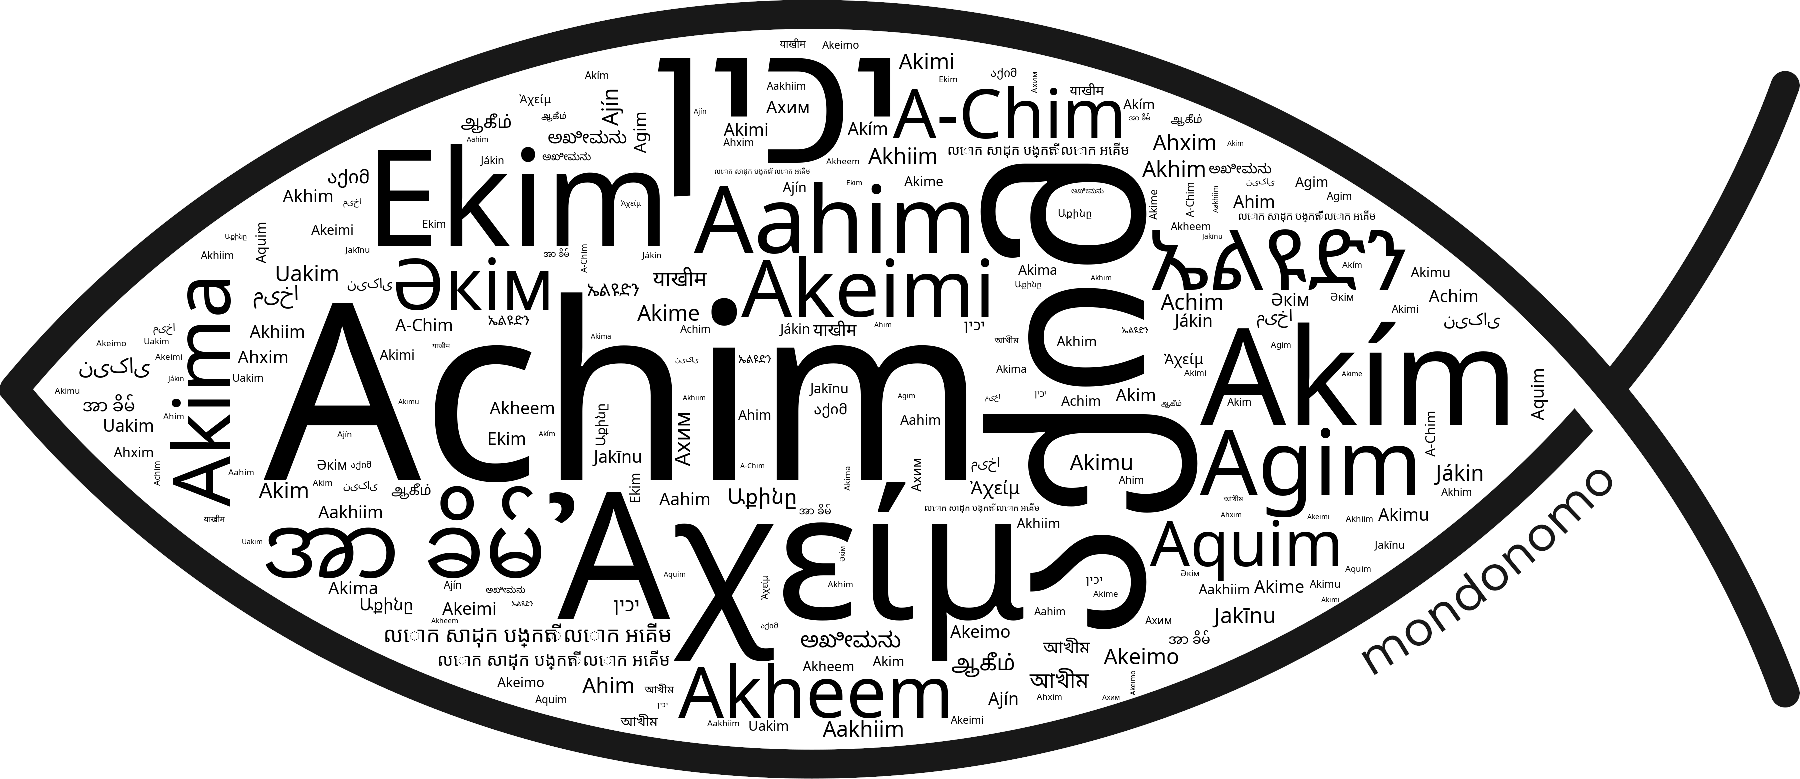 Name Achim in the world's Bibles